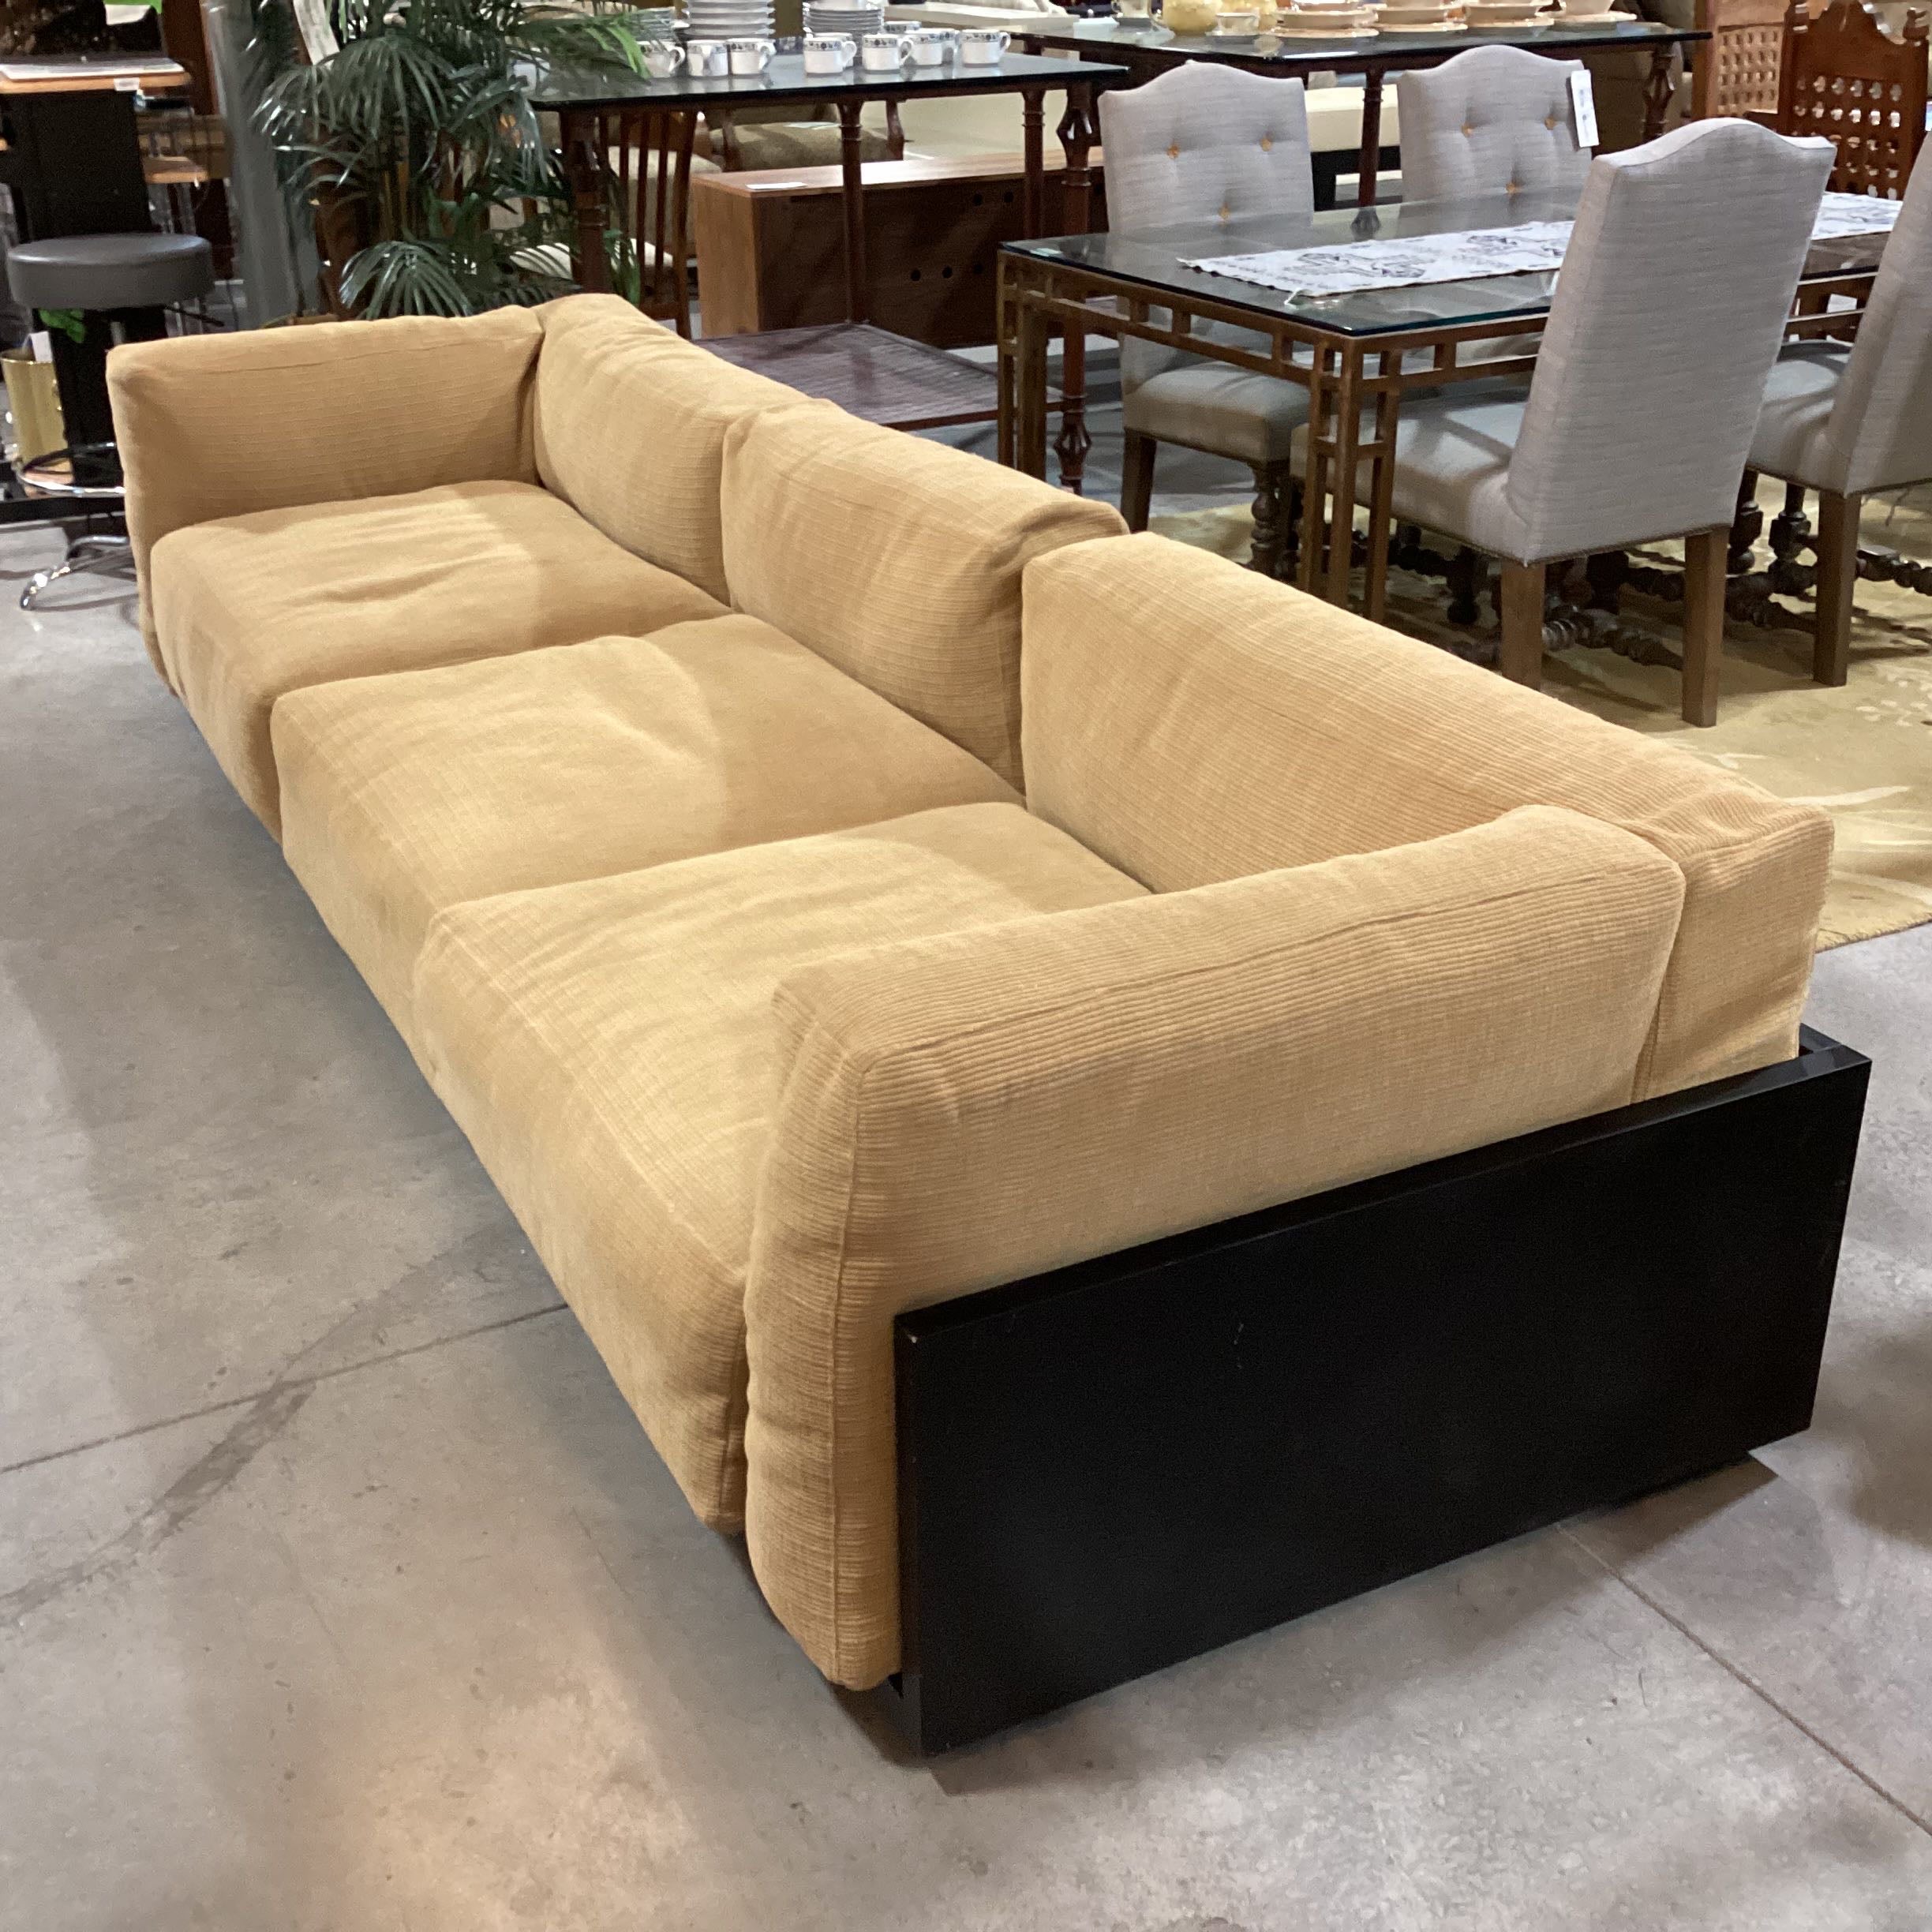 Cassina Mex Cube Gold Woven 3 Piece Seating System Sofa